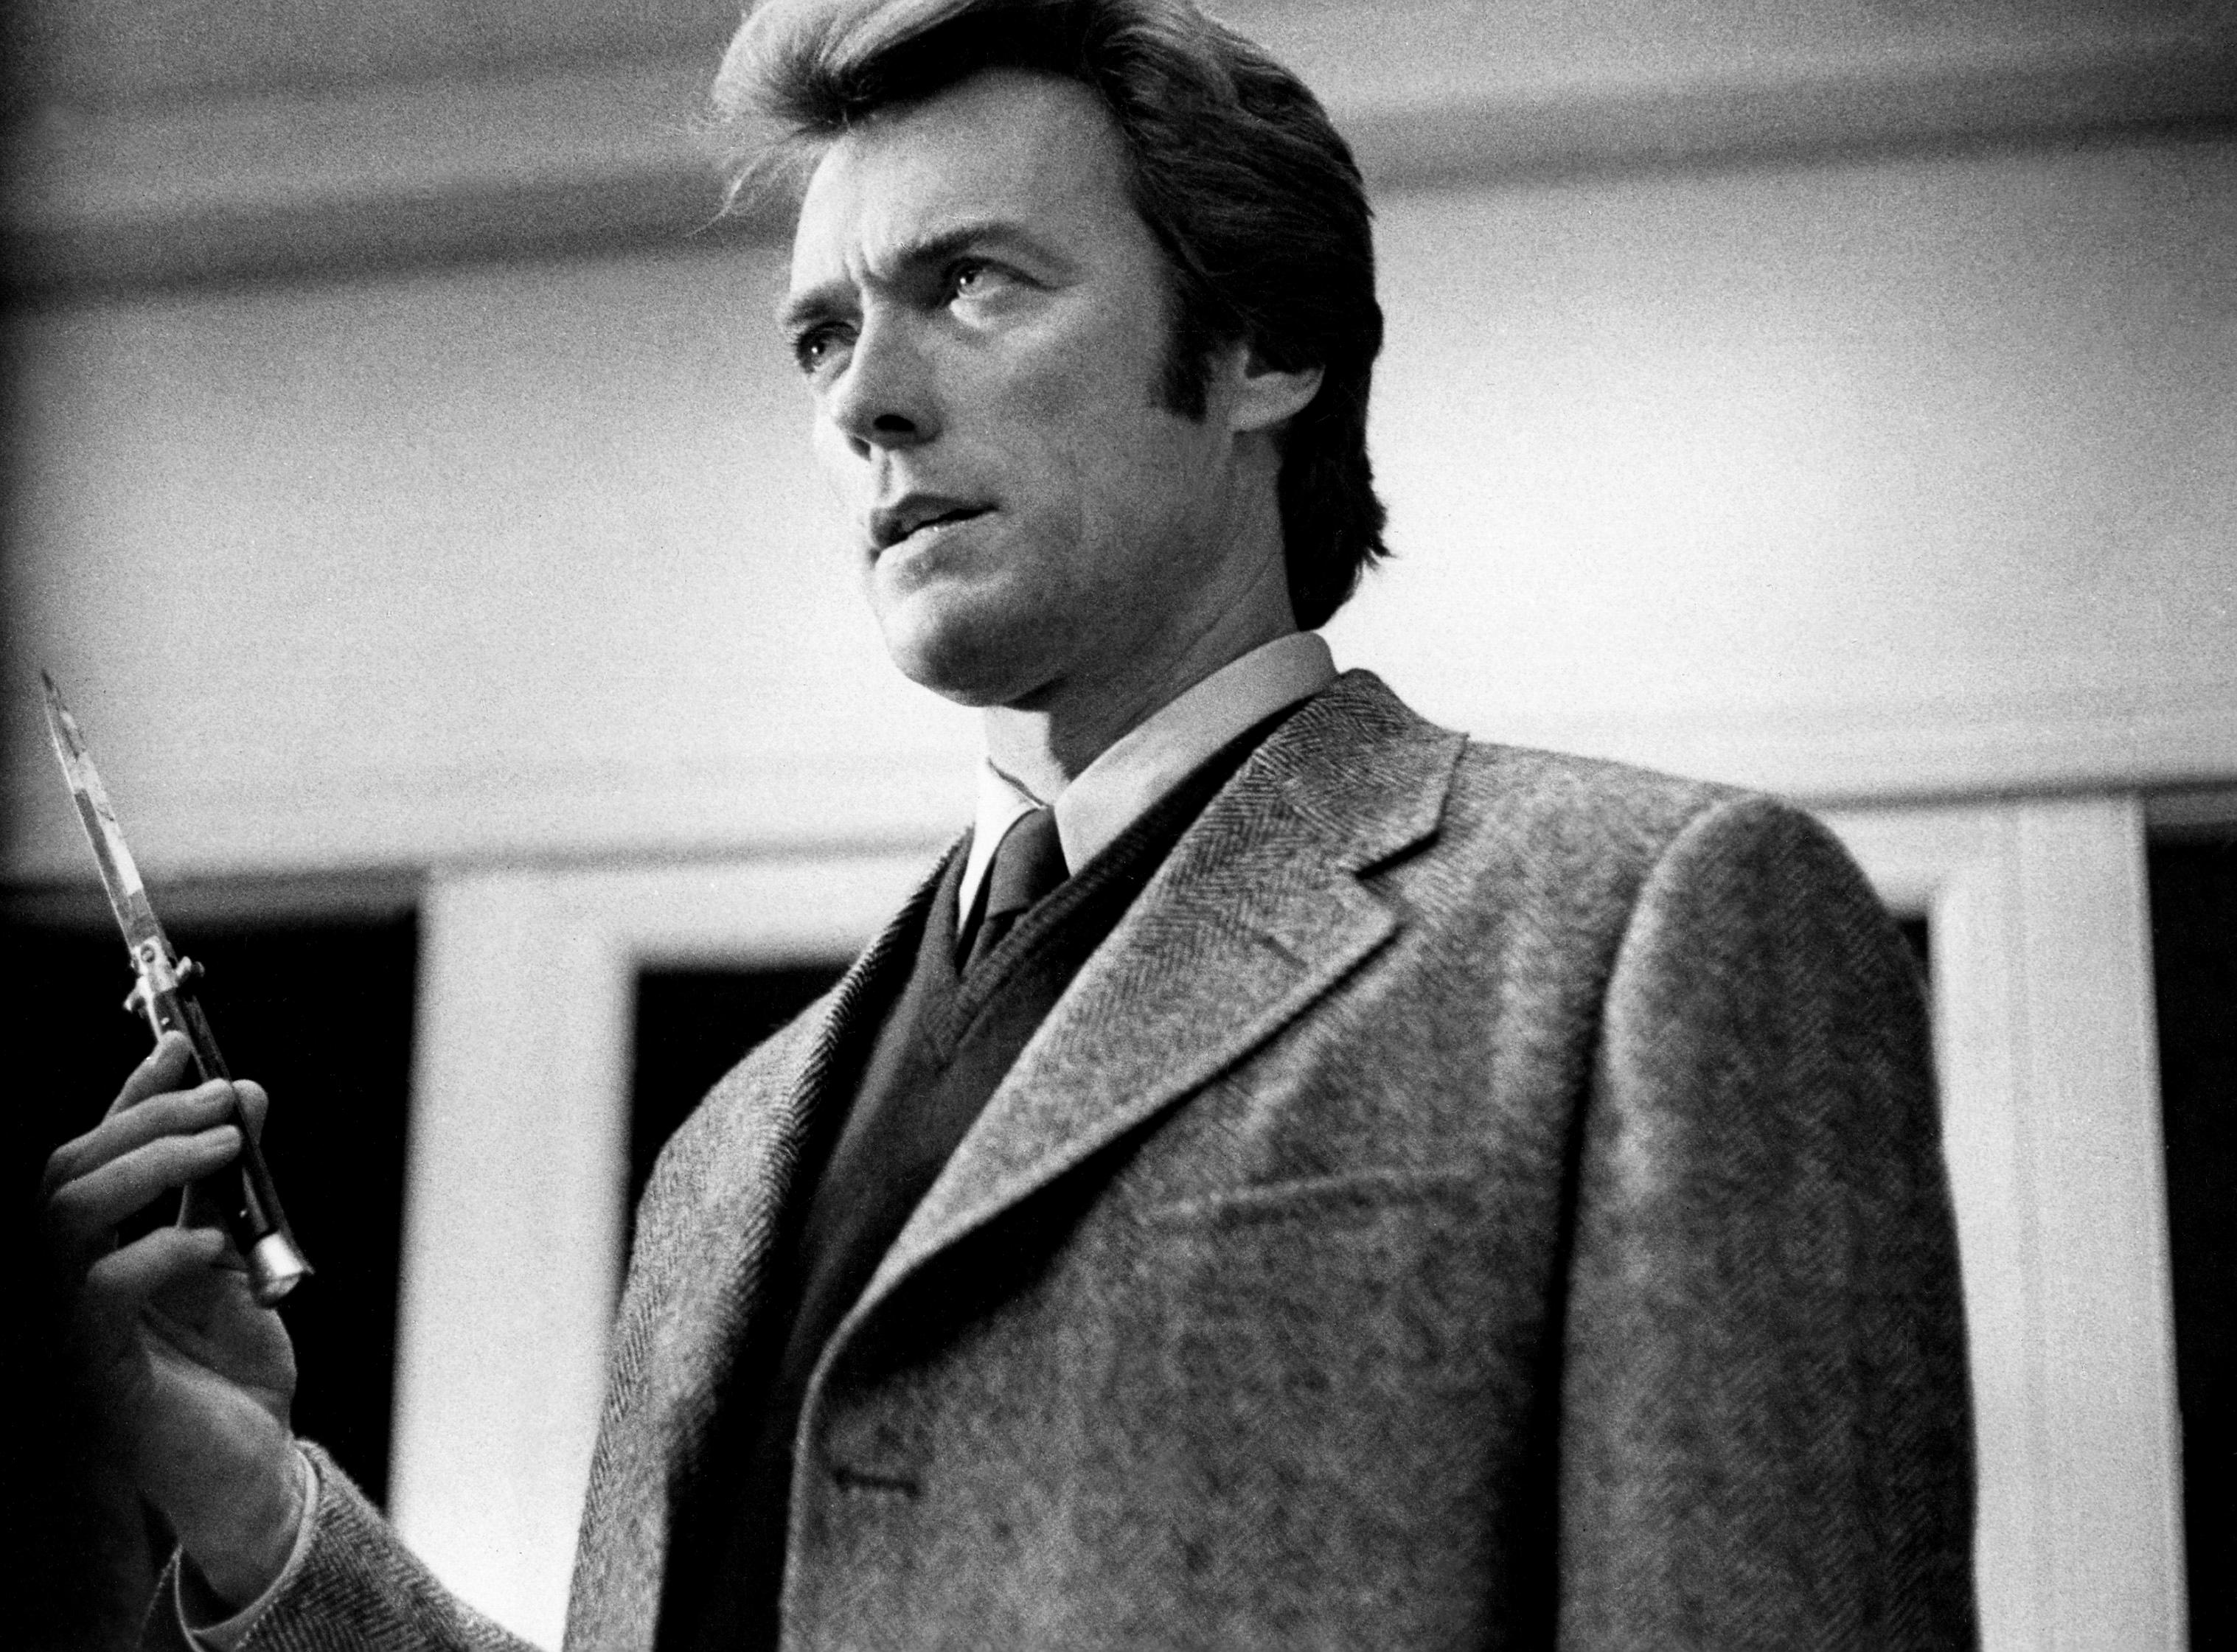 Unknown Black and White Photograph - Clint Eastwood with Butterfly Knife in "Dirty Harry" Globe Photos Fine Art Print